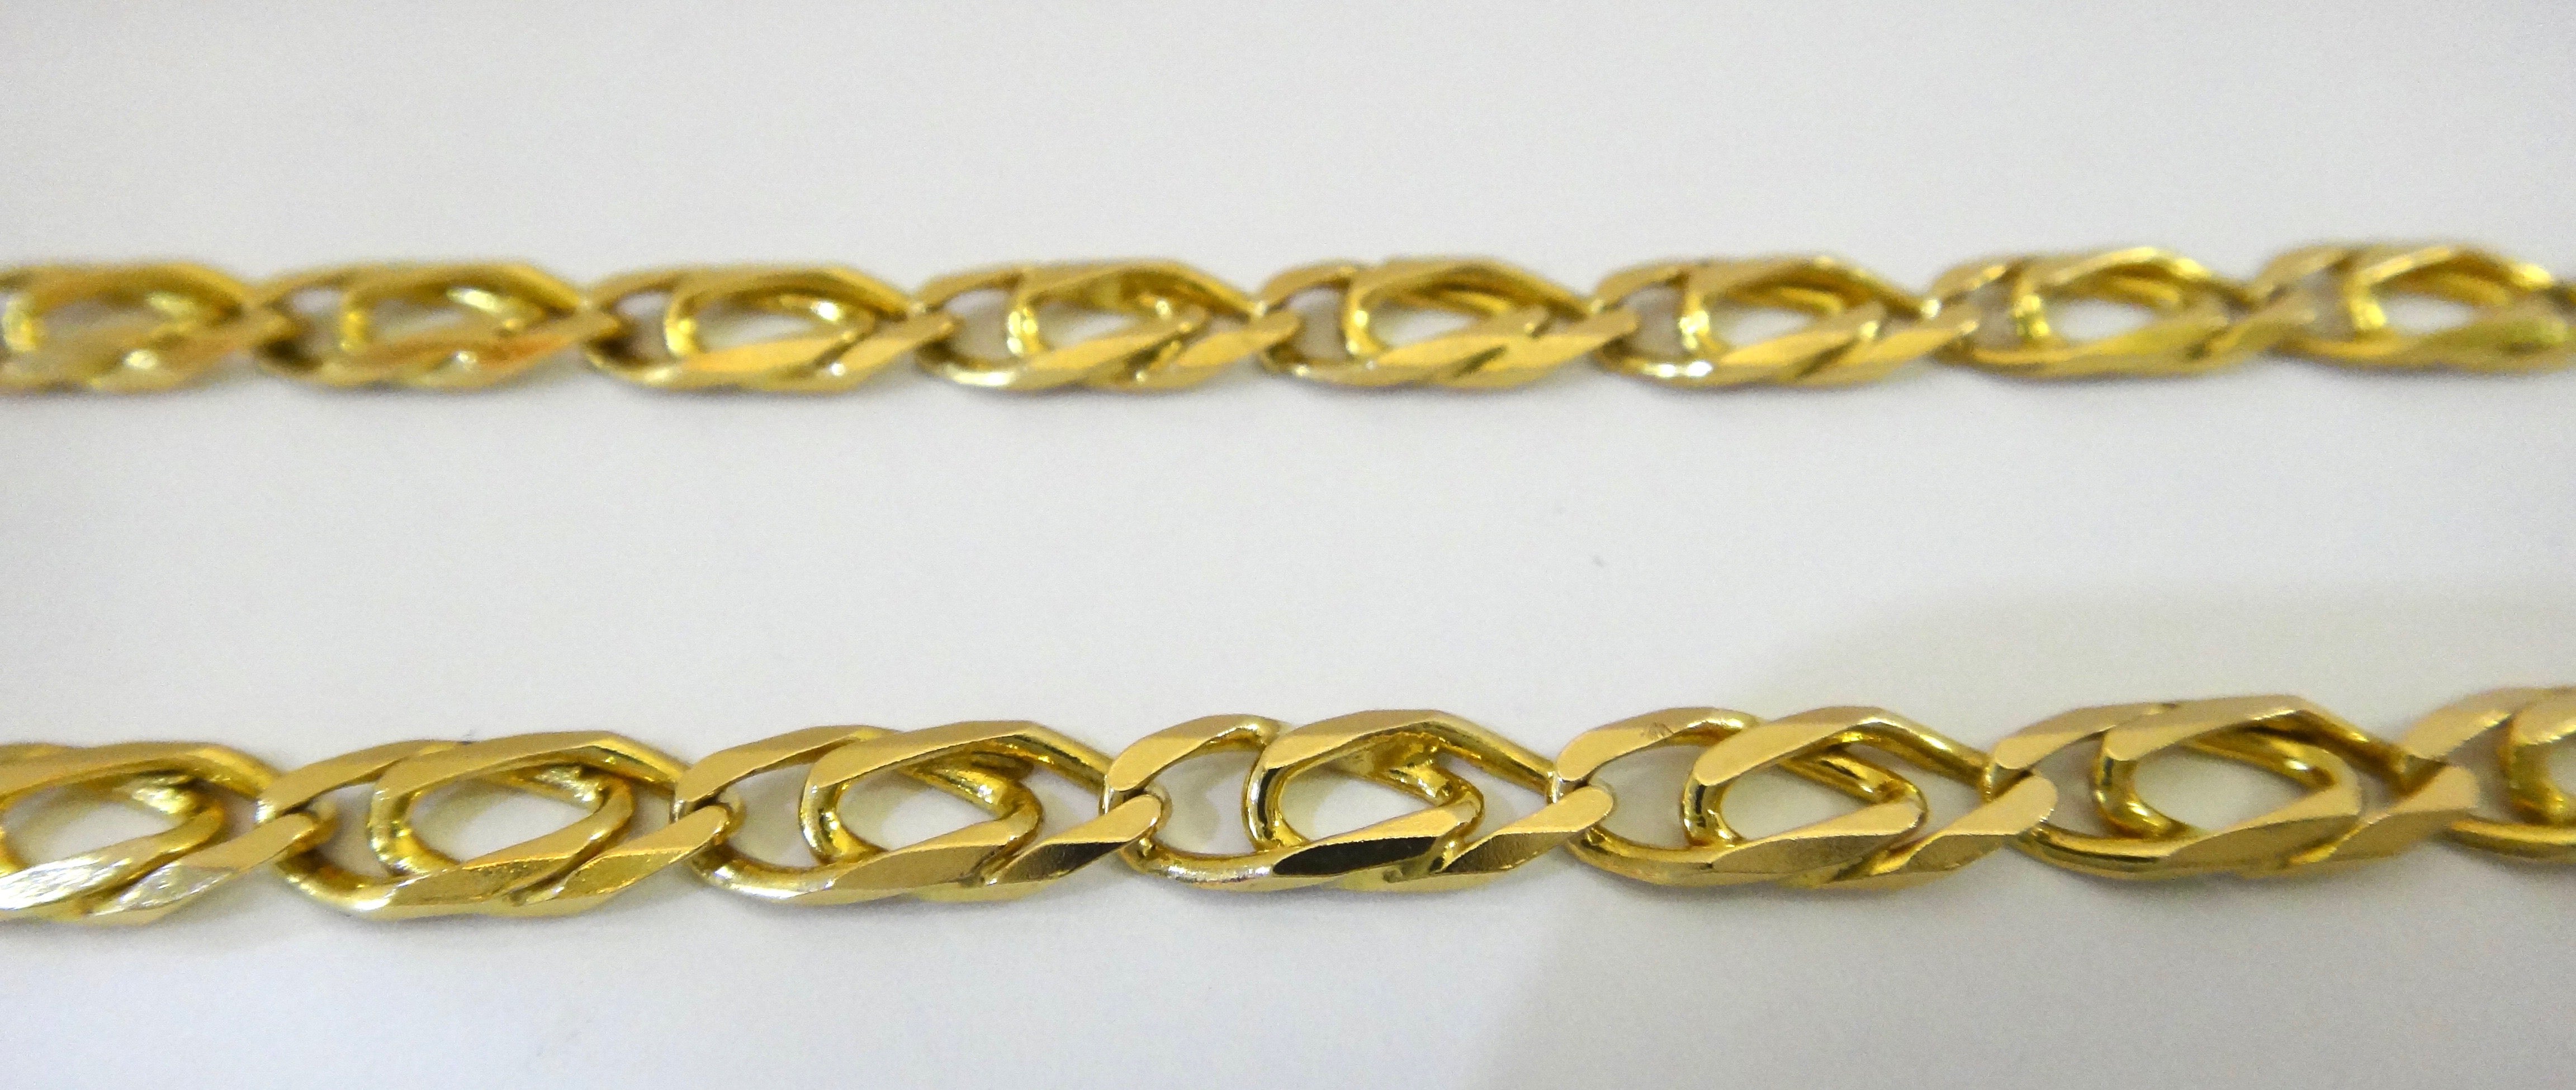 14CT Yellow GOLD Curb Link Style Necklace